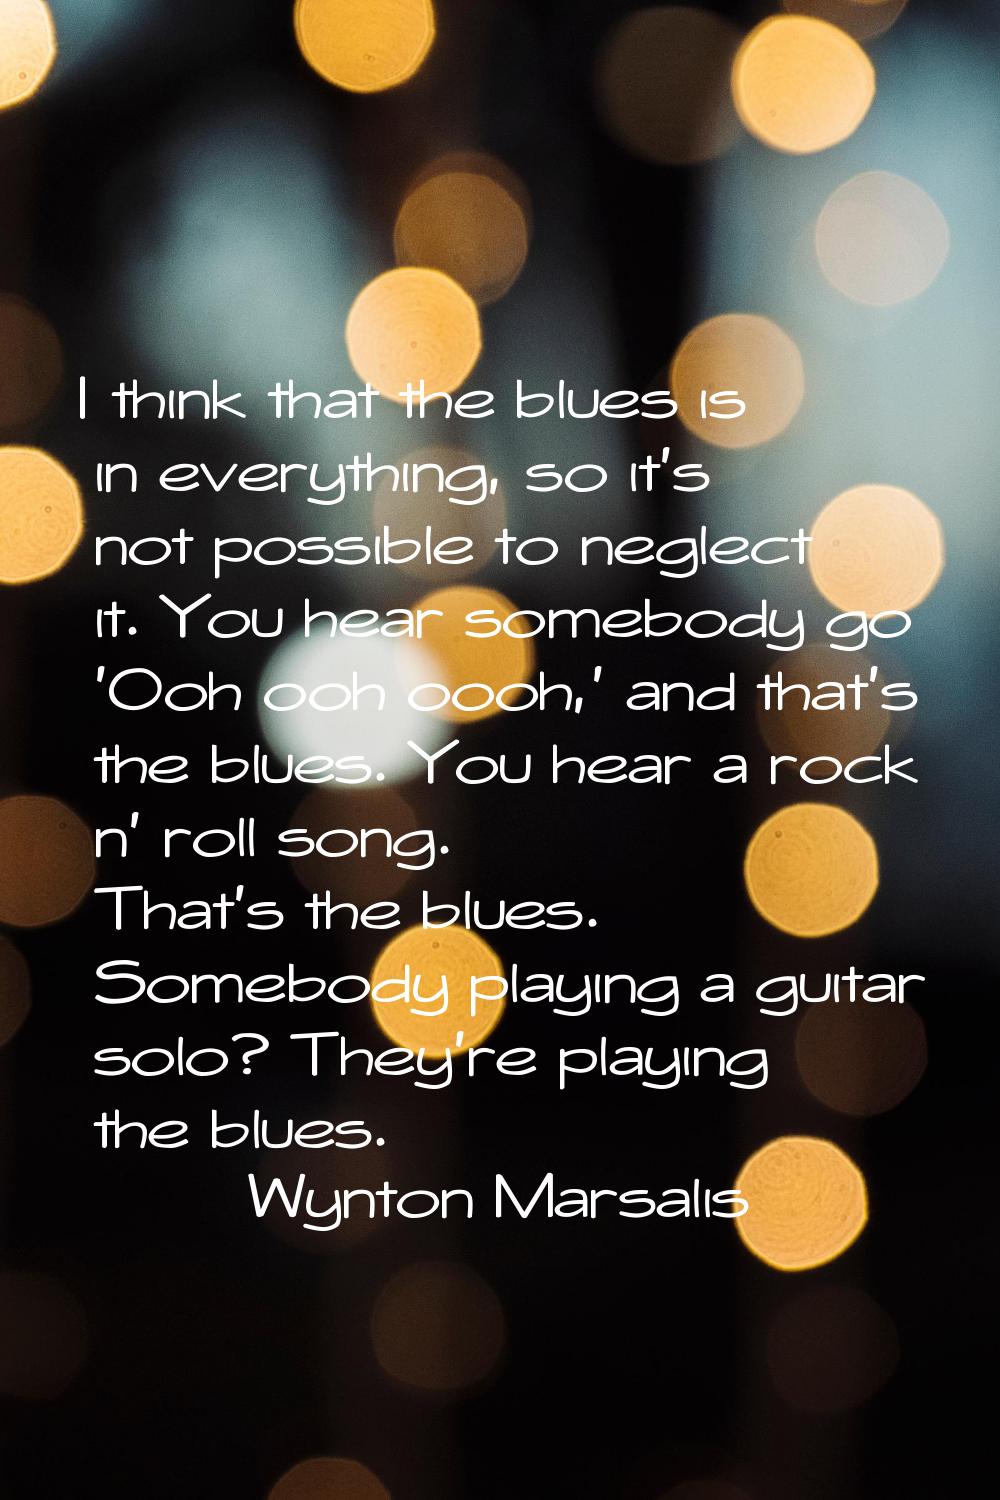 I think that the blues is in everything, so it's not possible to neglect it. You hear somebody go '